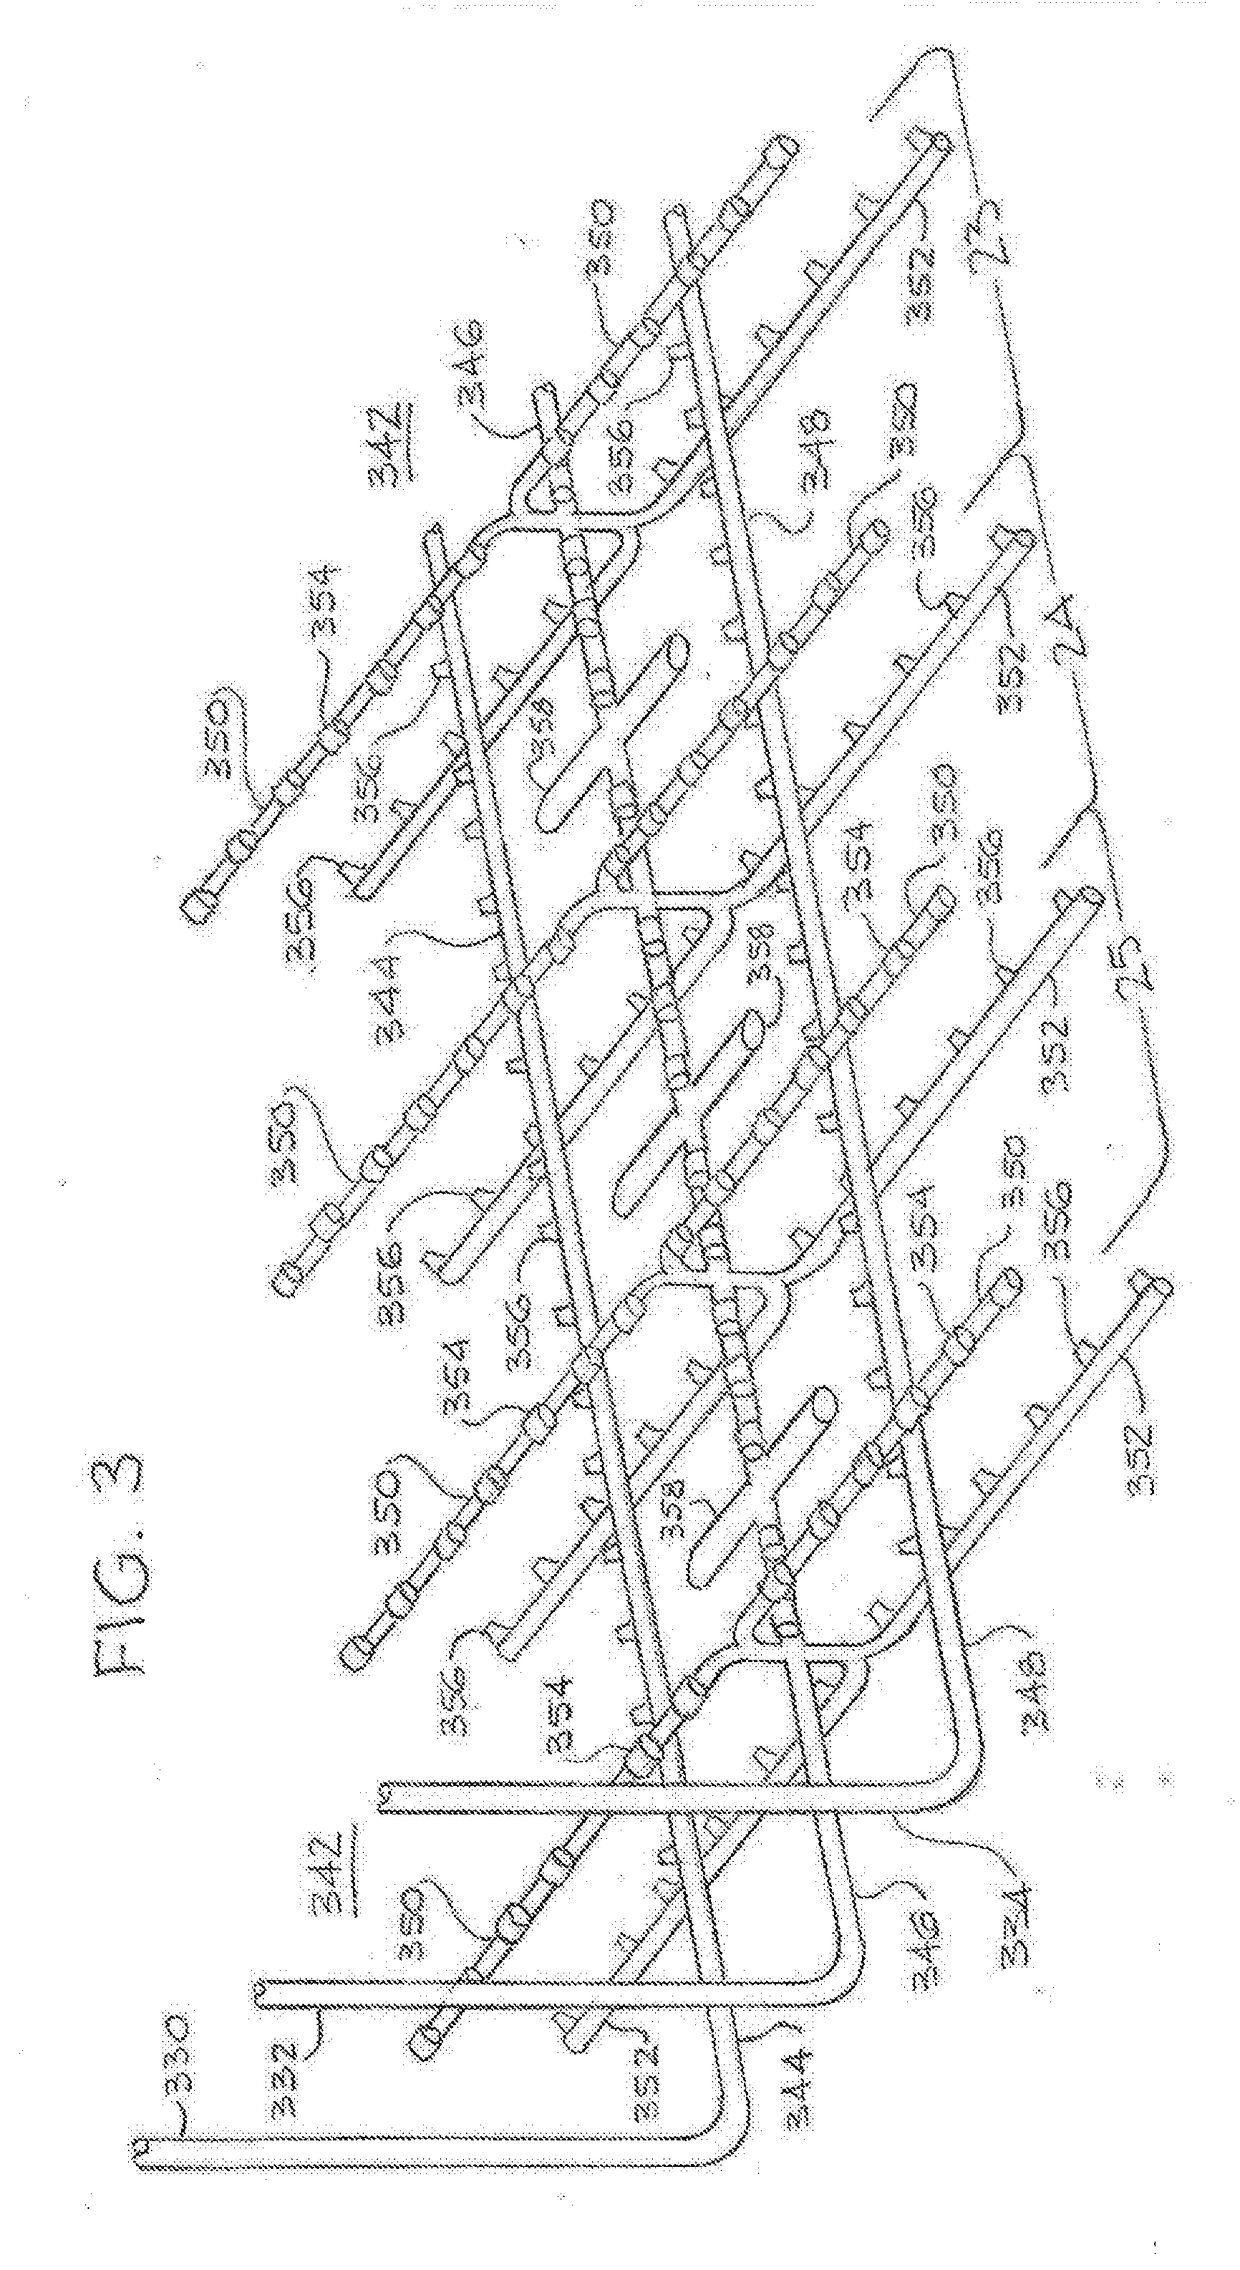 Methods and materials for evaluating and improving the production of geo-specific shale reservoirs